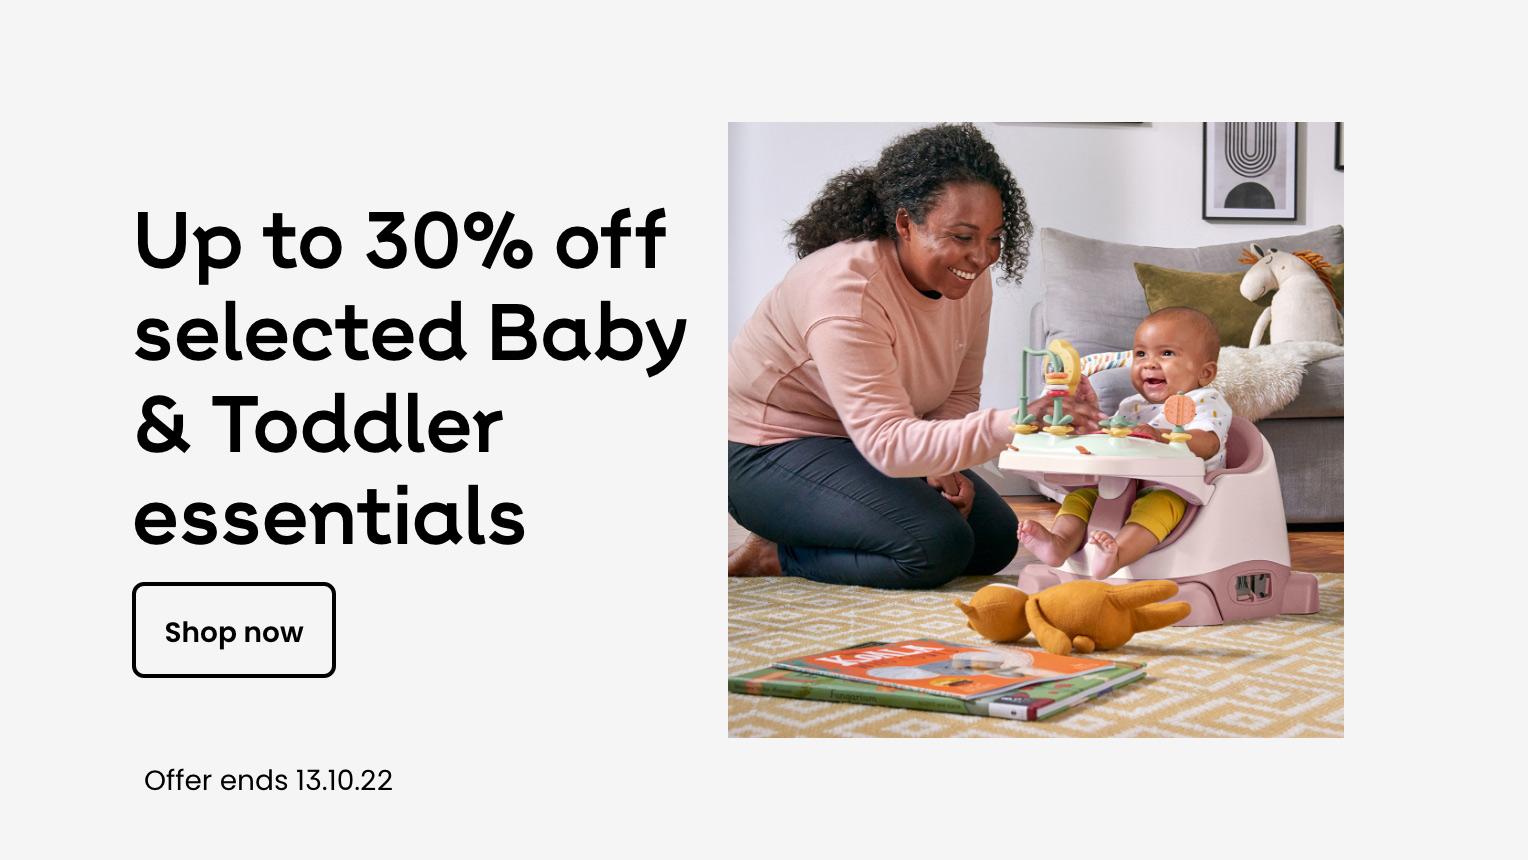 It's baby and toddler time. Babies need all sorts, but don't worry, we've got everything in one handy place. Shop now.